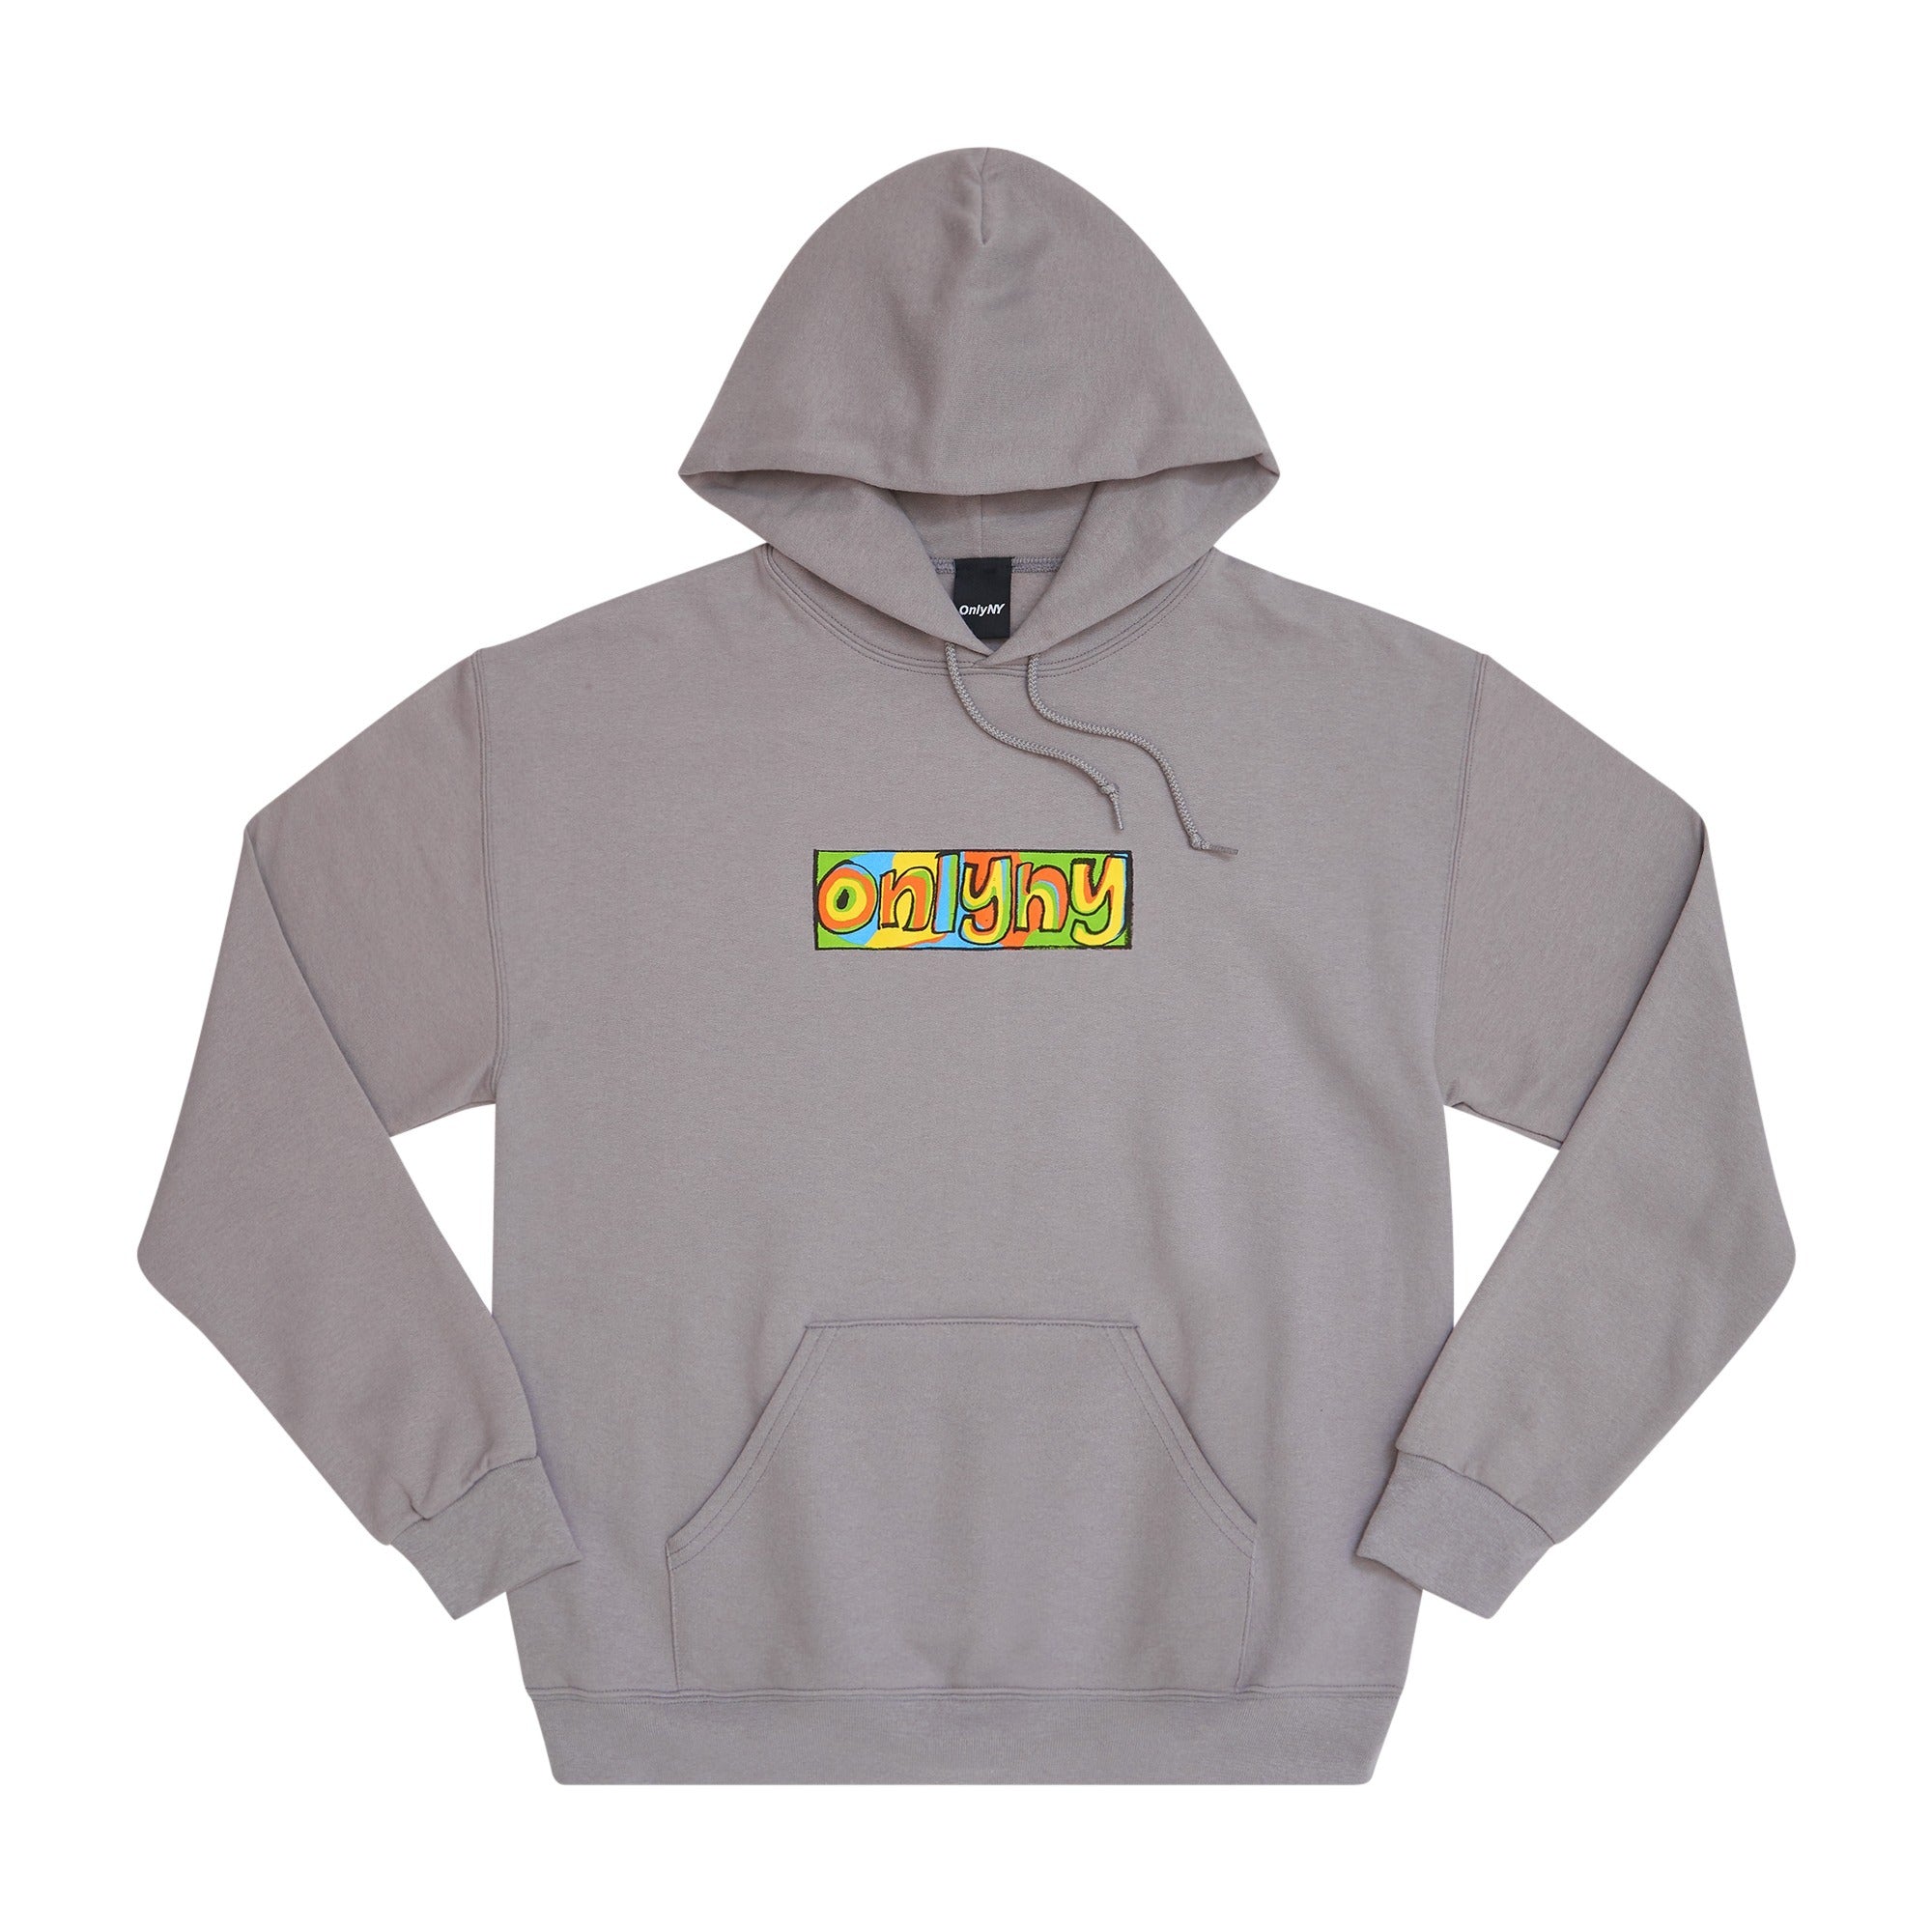 Only NY Psychedelic Hoodies Rock XXL